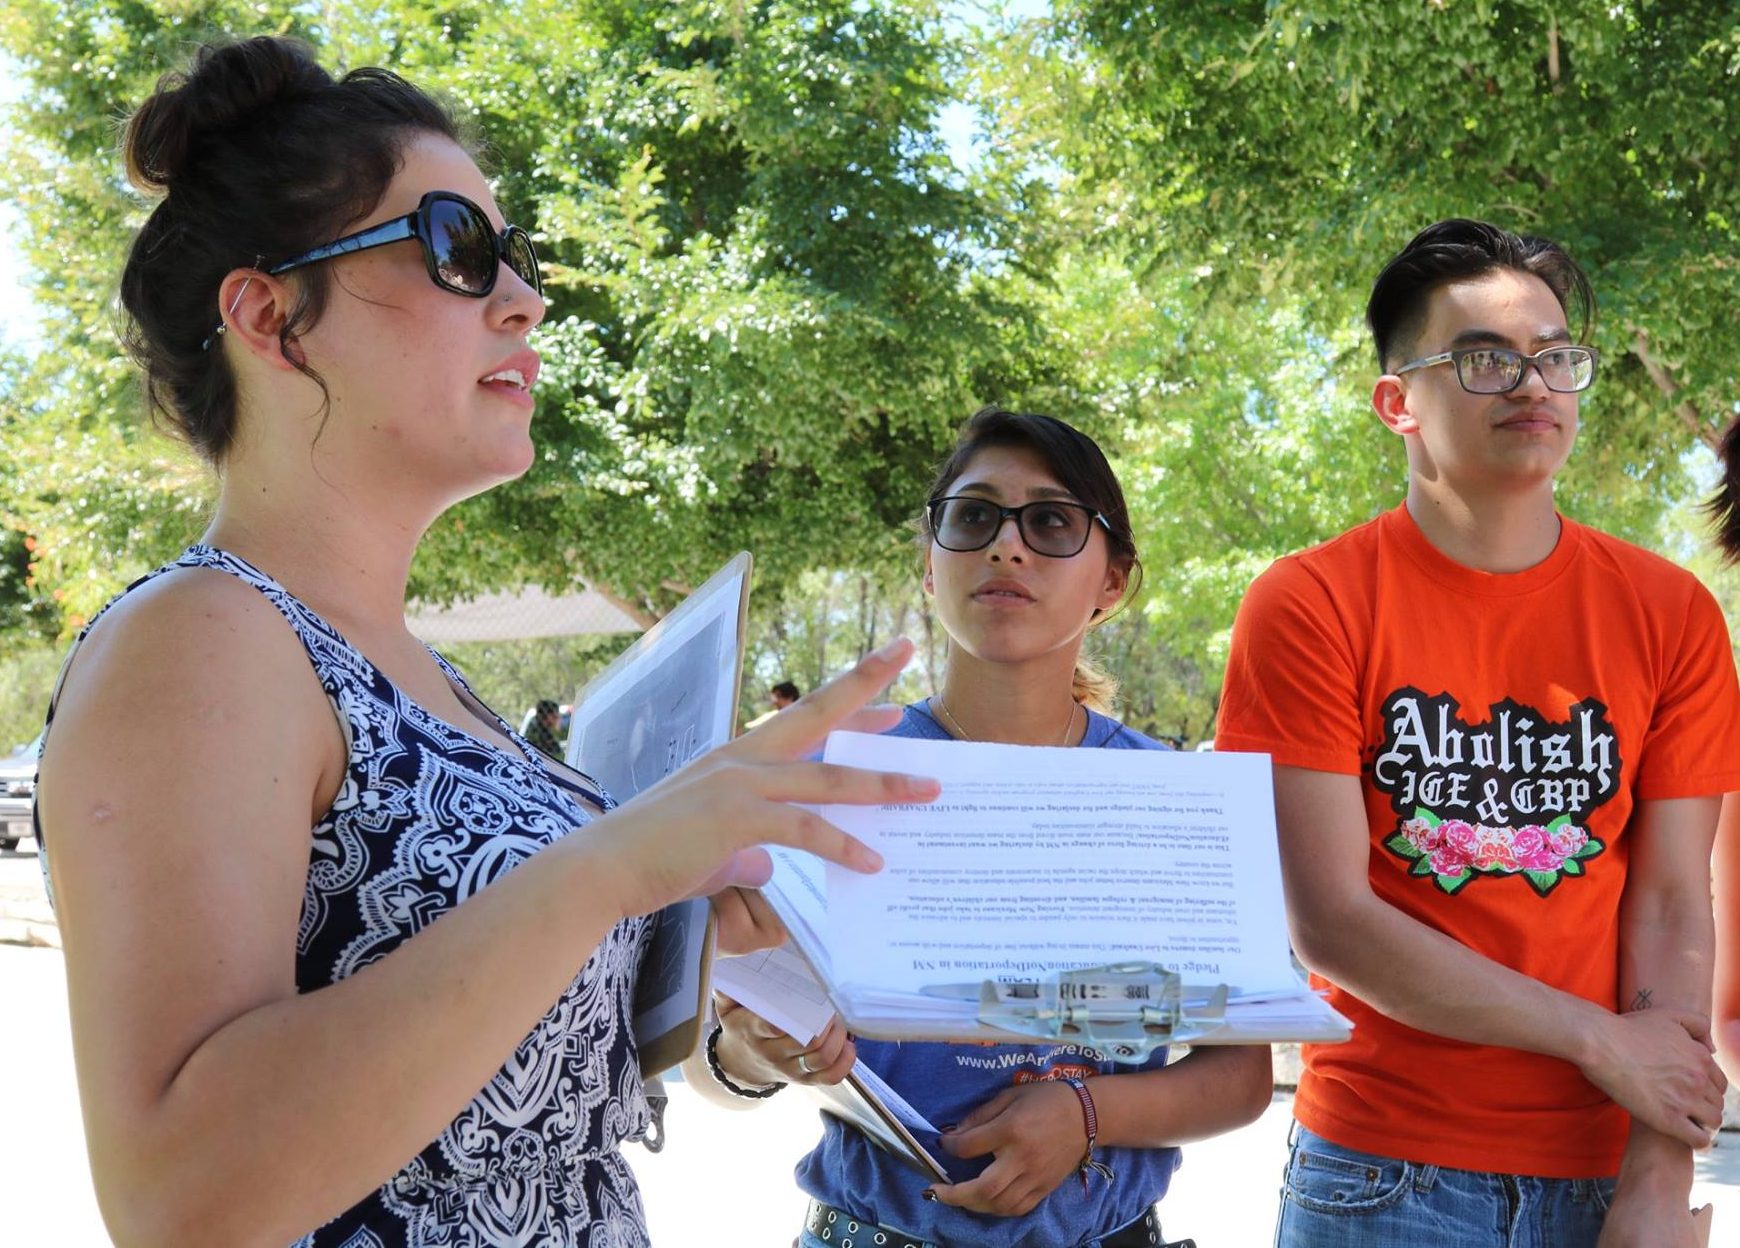 NMDT Launches “Live Unafraid” Campaign with #EducationNotDeportation Focus